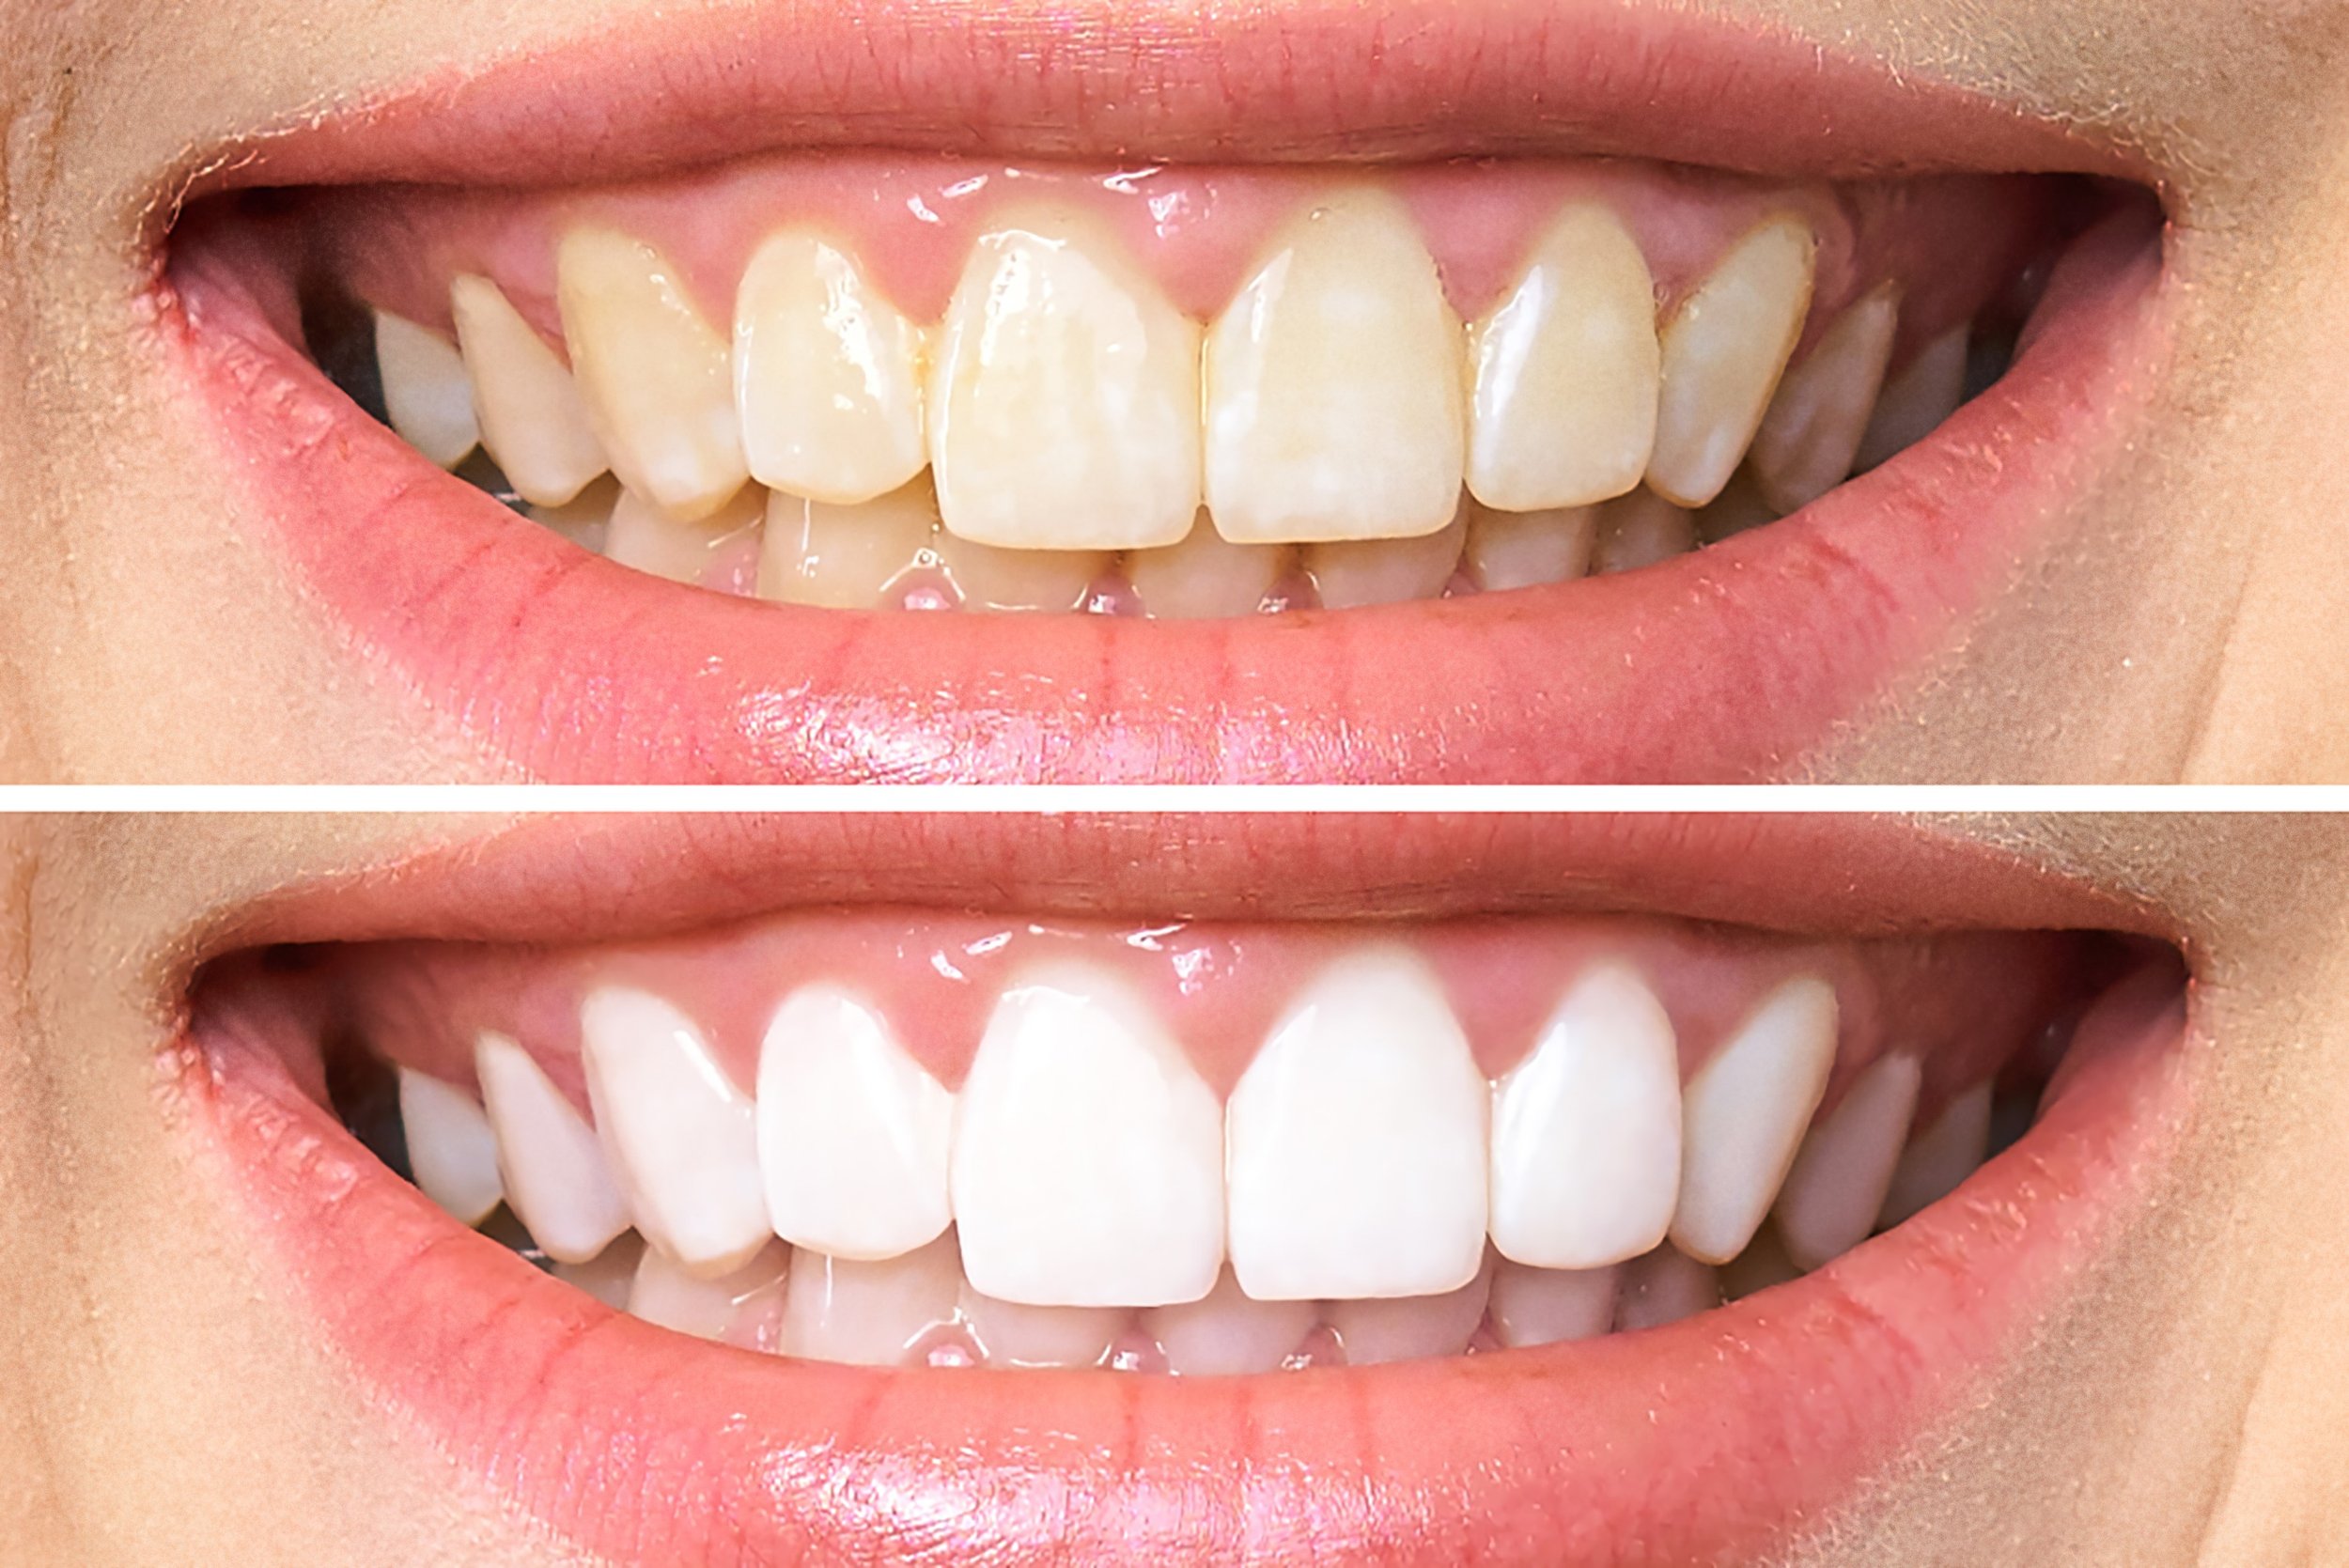 Professional tooth whitening with Popular Pola Tooth whitening system